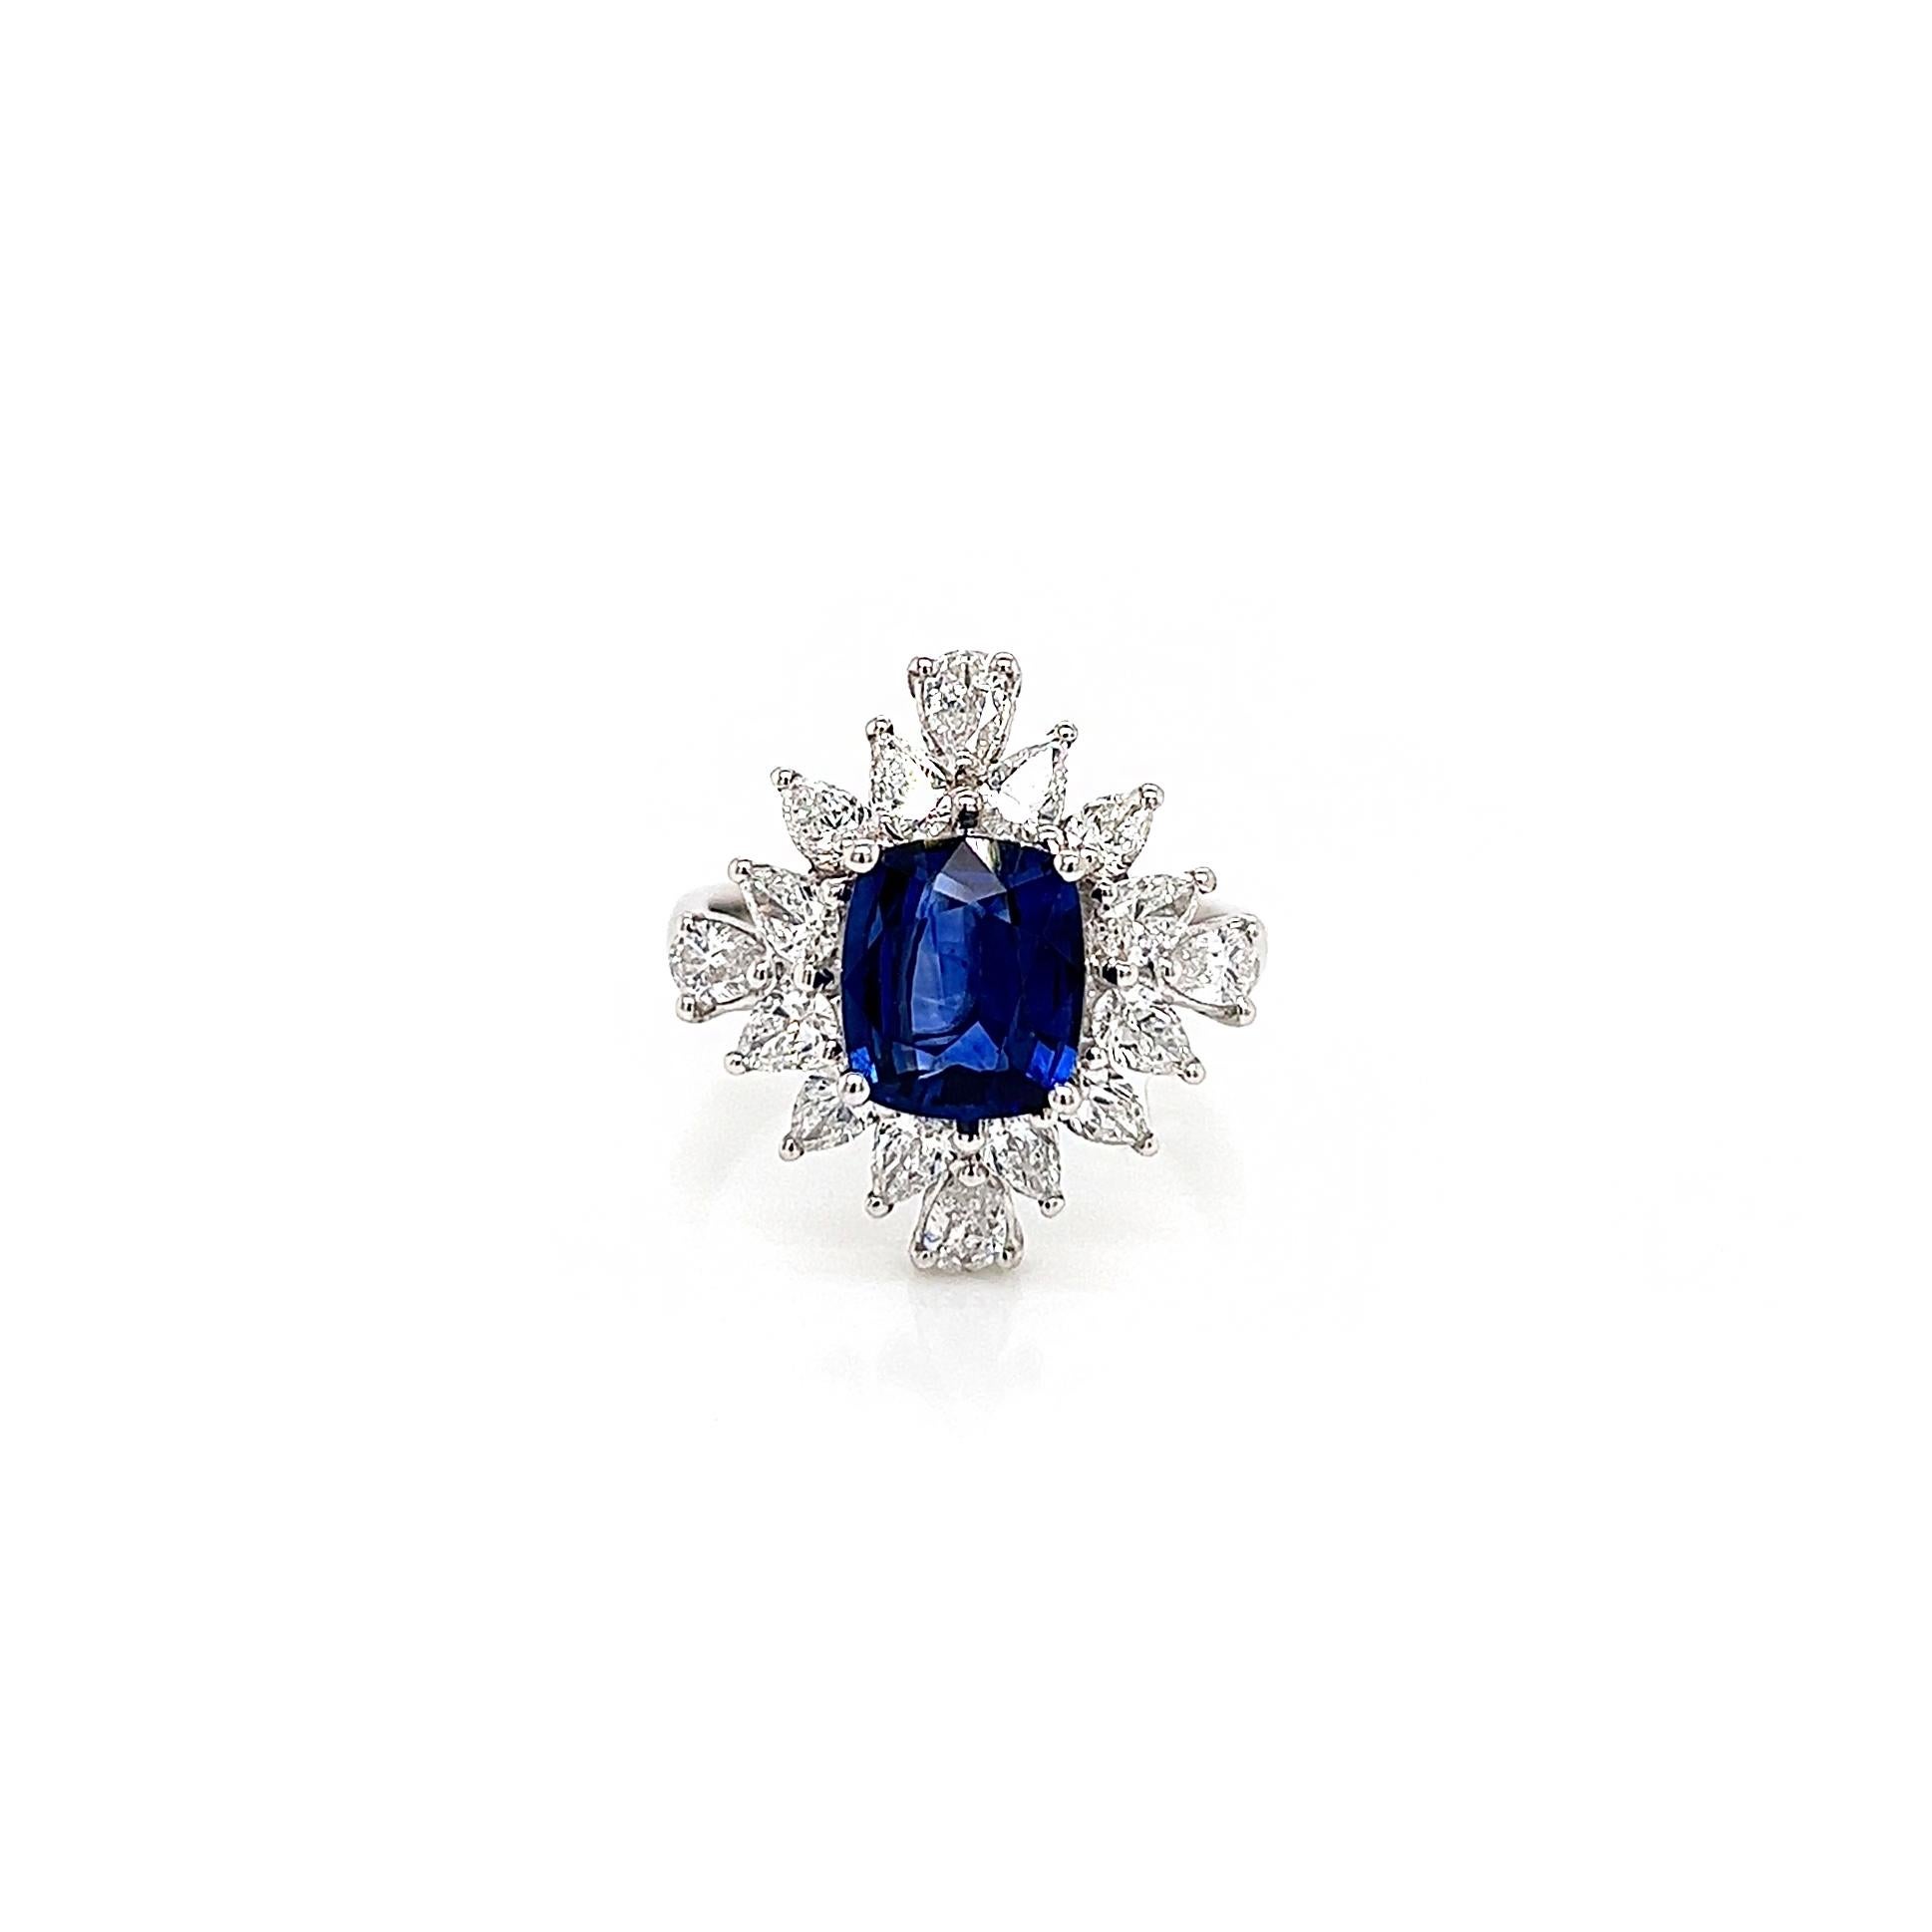 3.31 Total Carat Sapphire and Diamond Princess Diana Victorian Style Ladies Ring

-Metal Type: 18K White Gold
-2.05 Carat Cushion Cut Natural Blue Sapphire 
-1.26 Carat Pear Cut Natural Diamonds. E-F Color, VS Clarity 

-Size 6.5

Made in New York